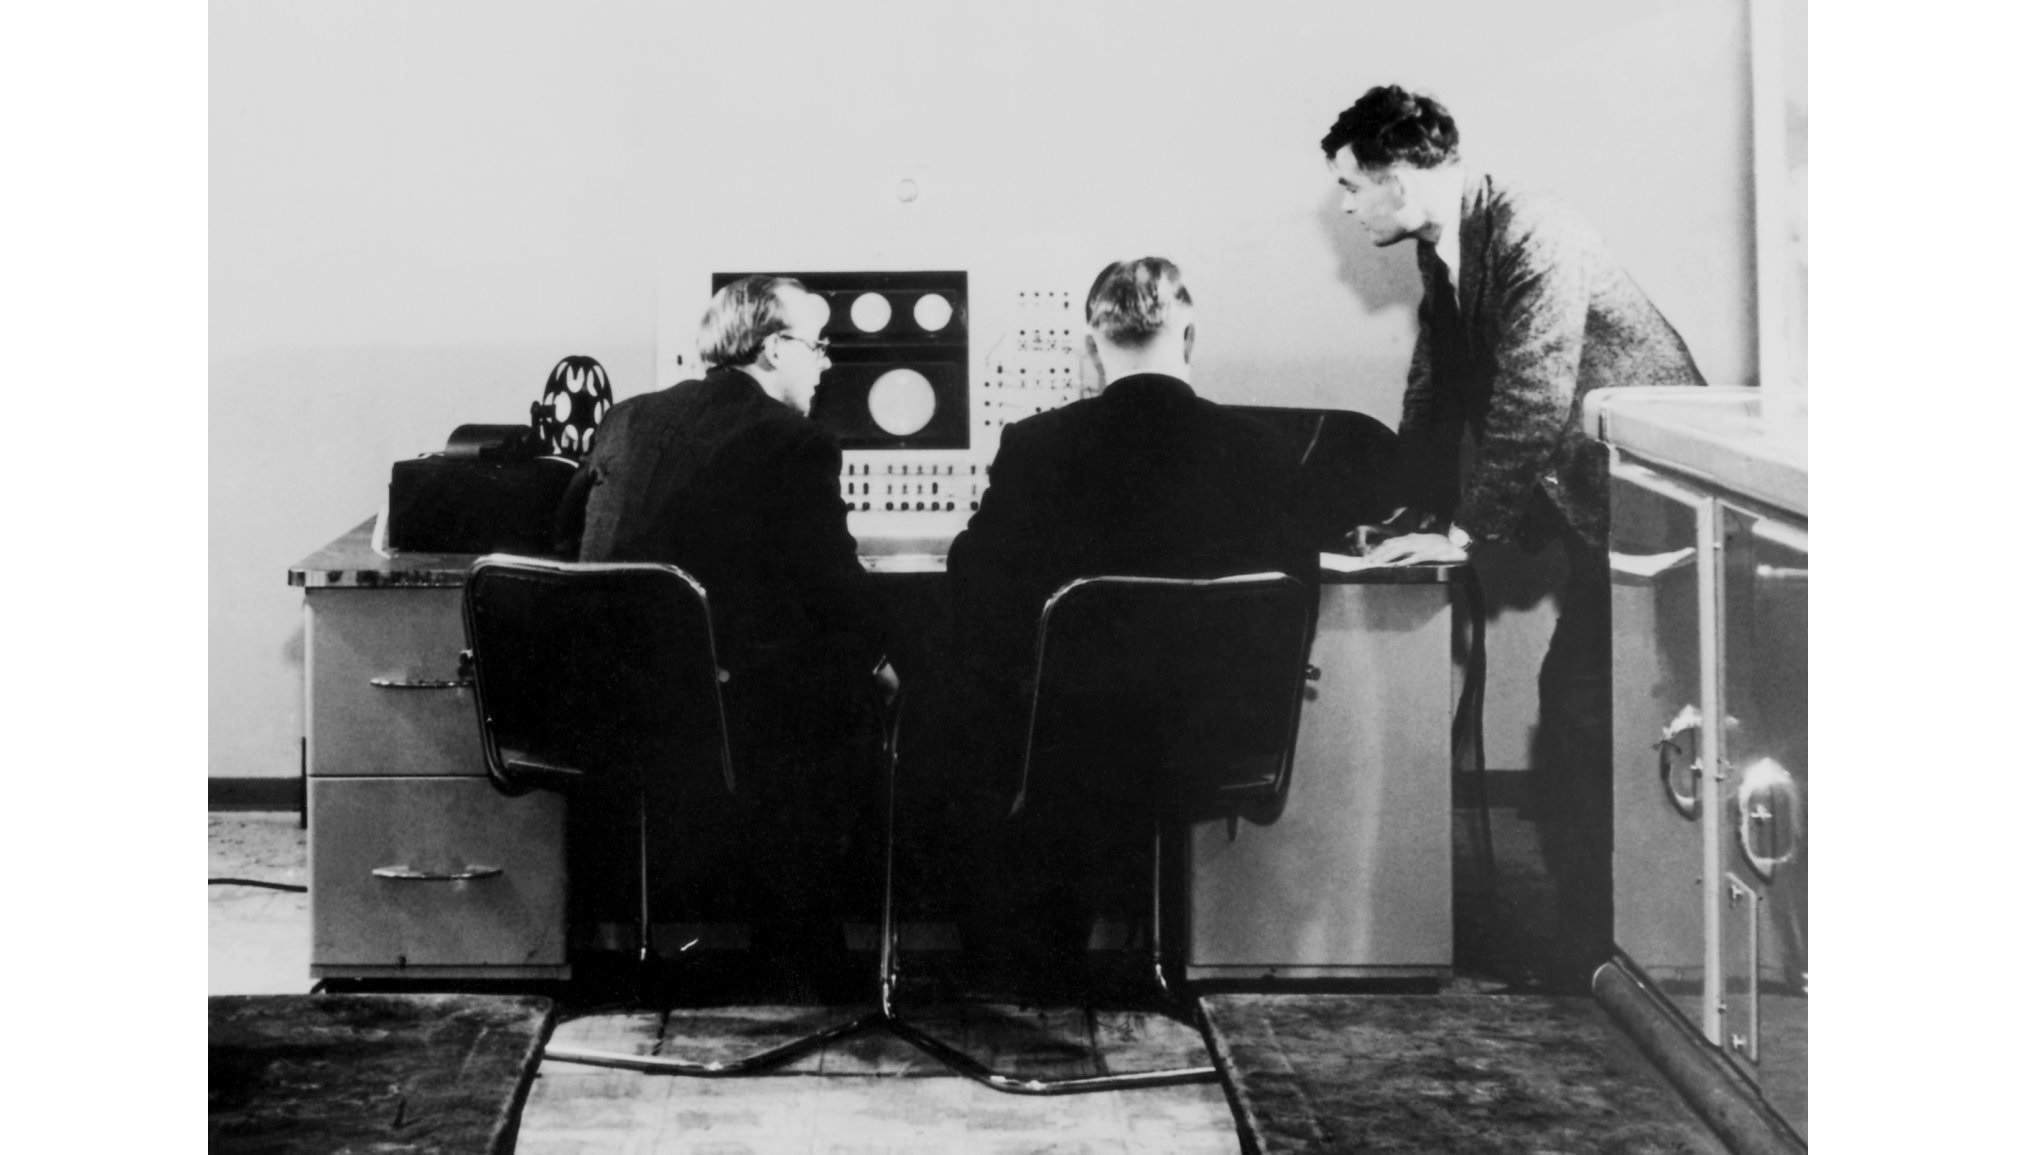 Figure 3: Alan Turing and Christopher Strachey at Mark 1 console,  www.engadget.com/2016/09/26/alan-turings-groundbreaking-synthesizer-music-restored/ (https://www.engadget.com/2016/09/26/alan-turings-groundbreaking-synthesizer-music-restored/).